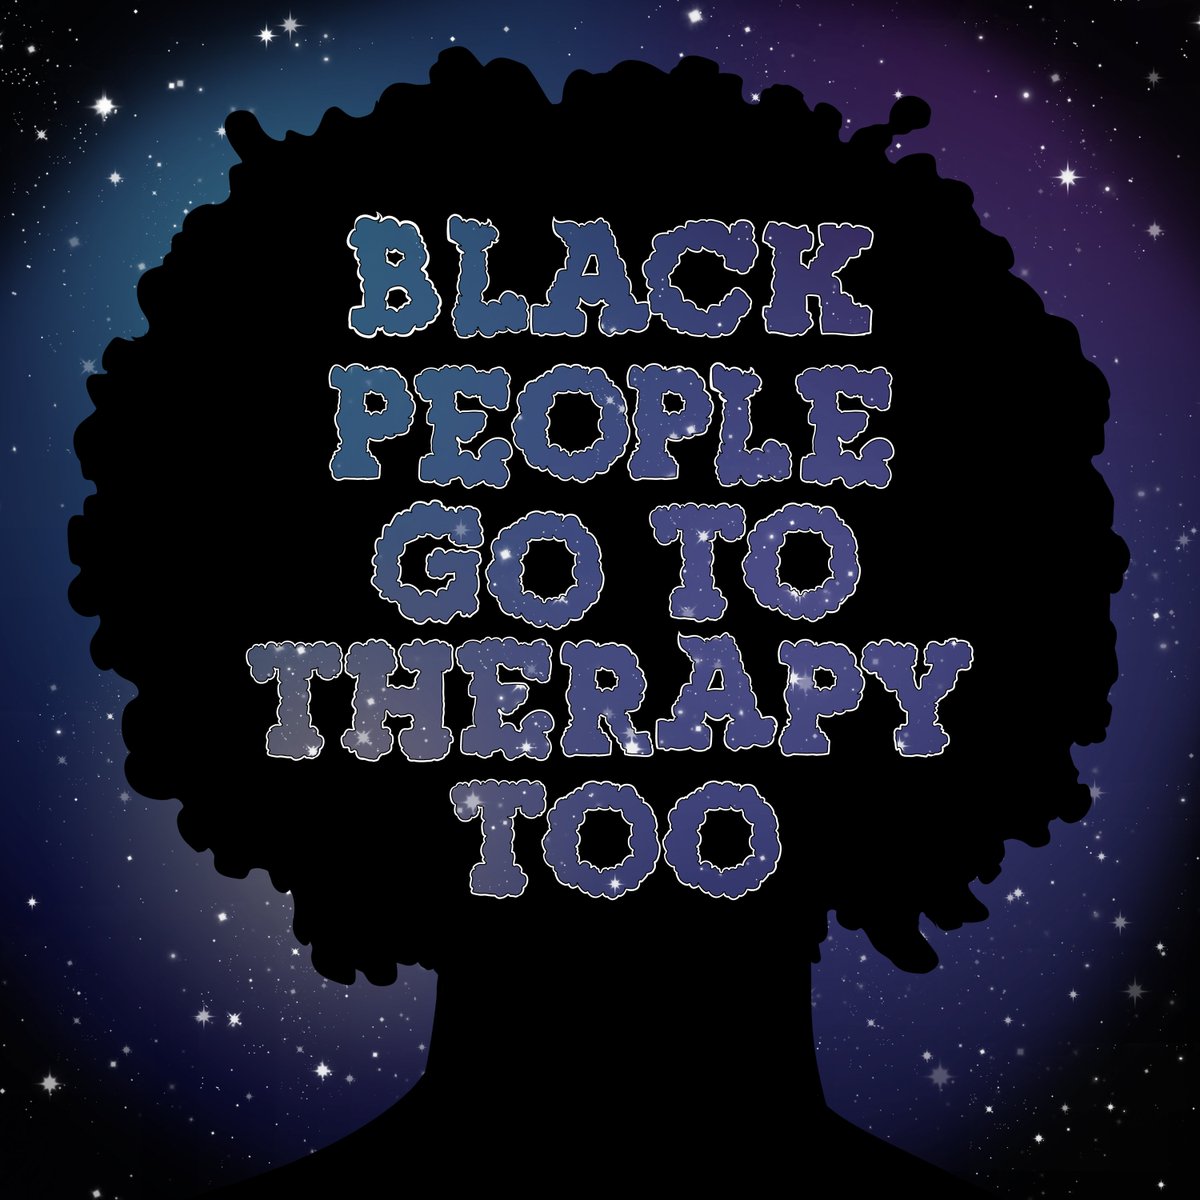 First episode is live on ALL major podcast platforms!!!
Just click here to find your platform of choice --> anchor.fm/blackpeoplethe…

#BlackPeopleTherapy #BlackMentalHealth #PoCMentalHealth #PoCTherapy #Podcast #PodcastOfColor #MentalHealthPodcast #BlackPodcast #PoCPodcast